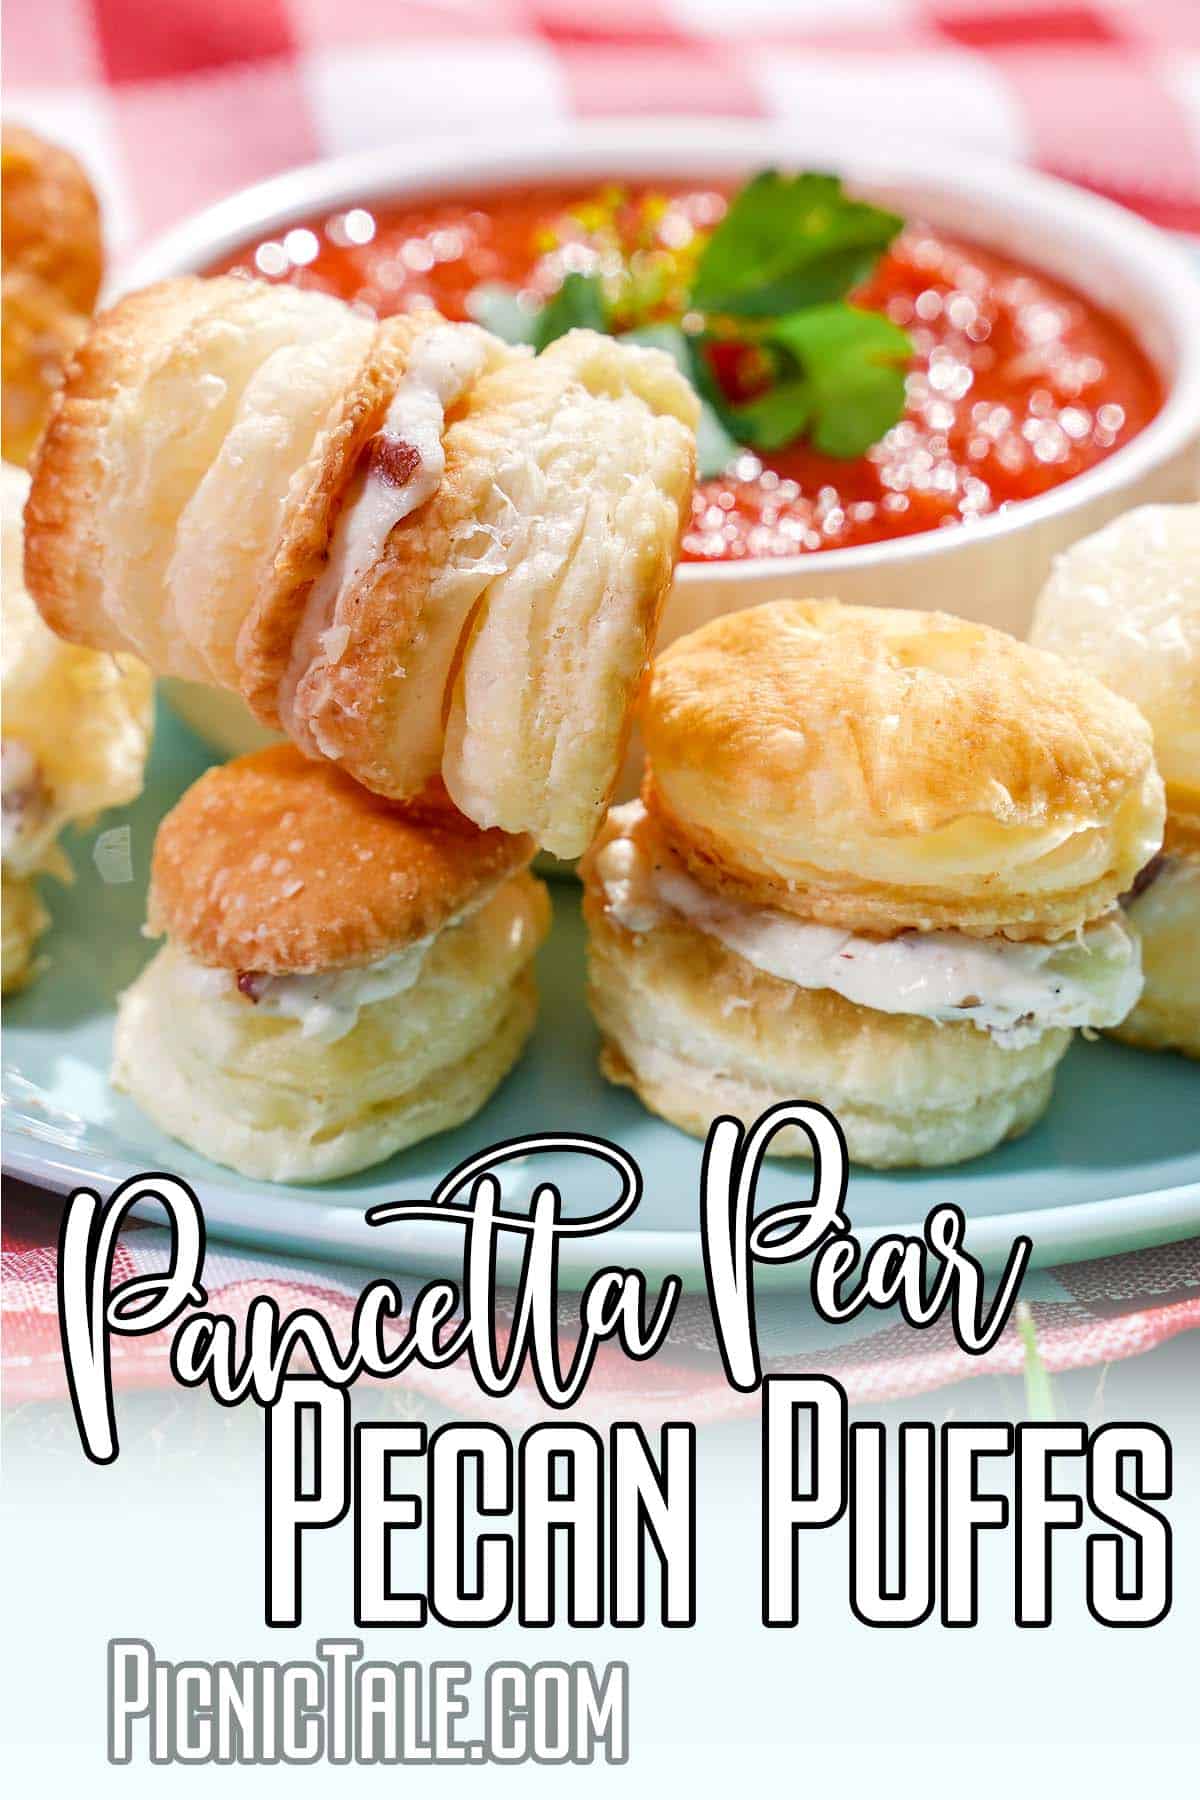 simple fruit puff recipe with text which reads Pancetta Pear Pecan Puffs